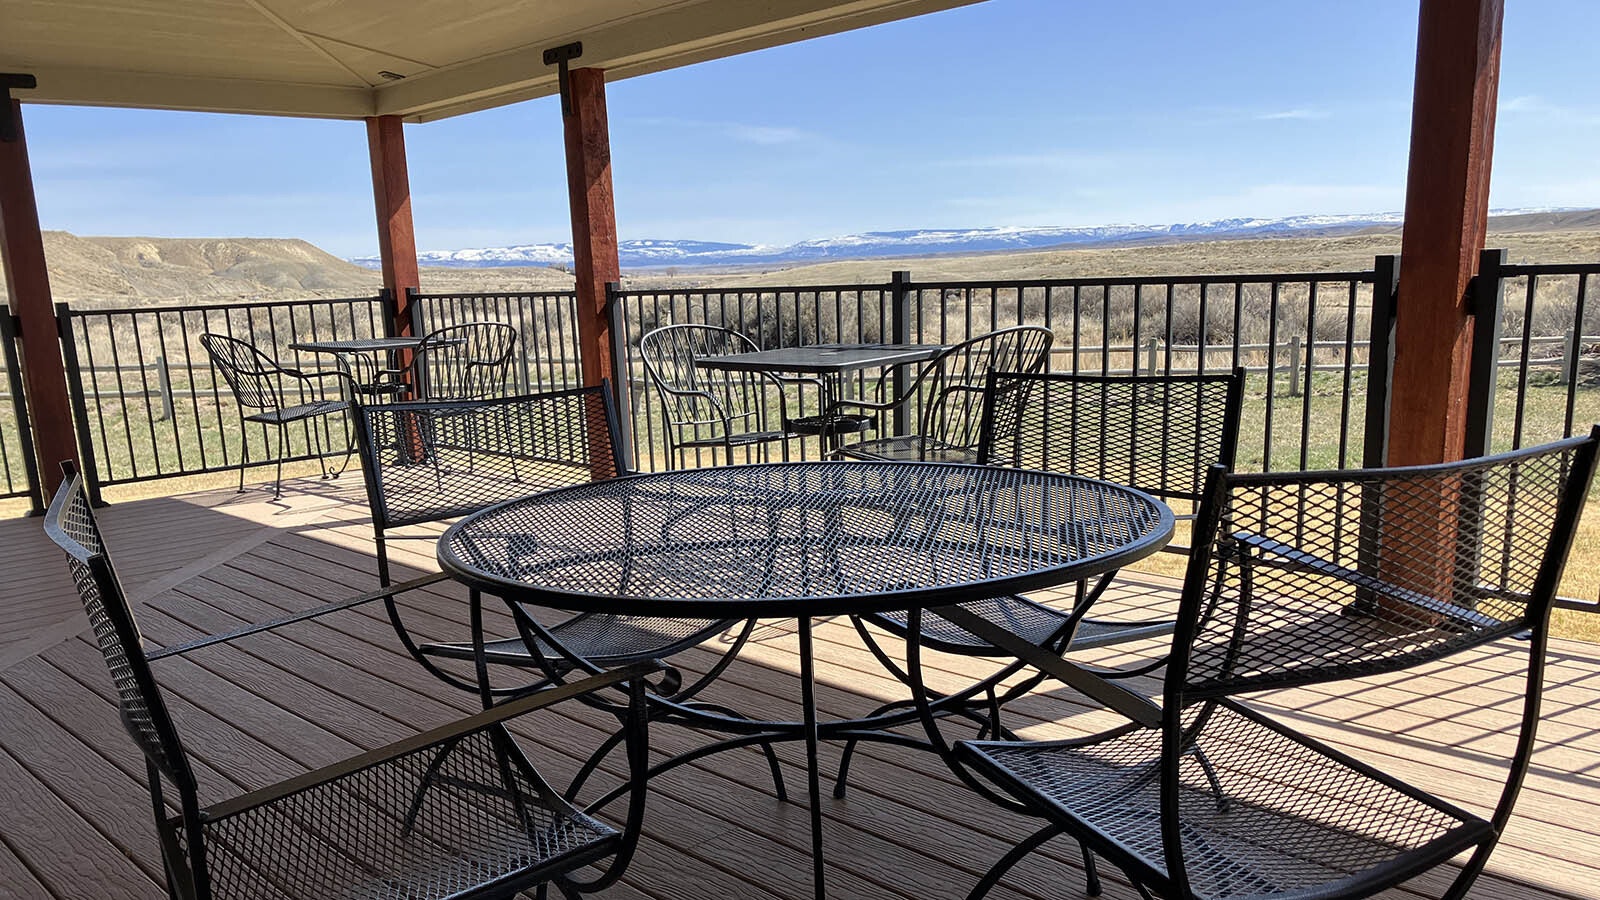 The North Platte Lodge offers visitors an impressive view off of its porch which overlooks the North Platte Rivers and mountains to the southwest of Alcova.